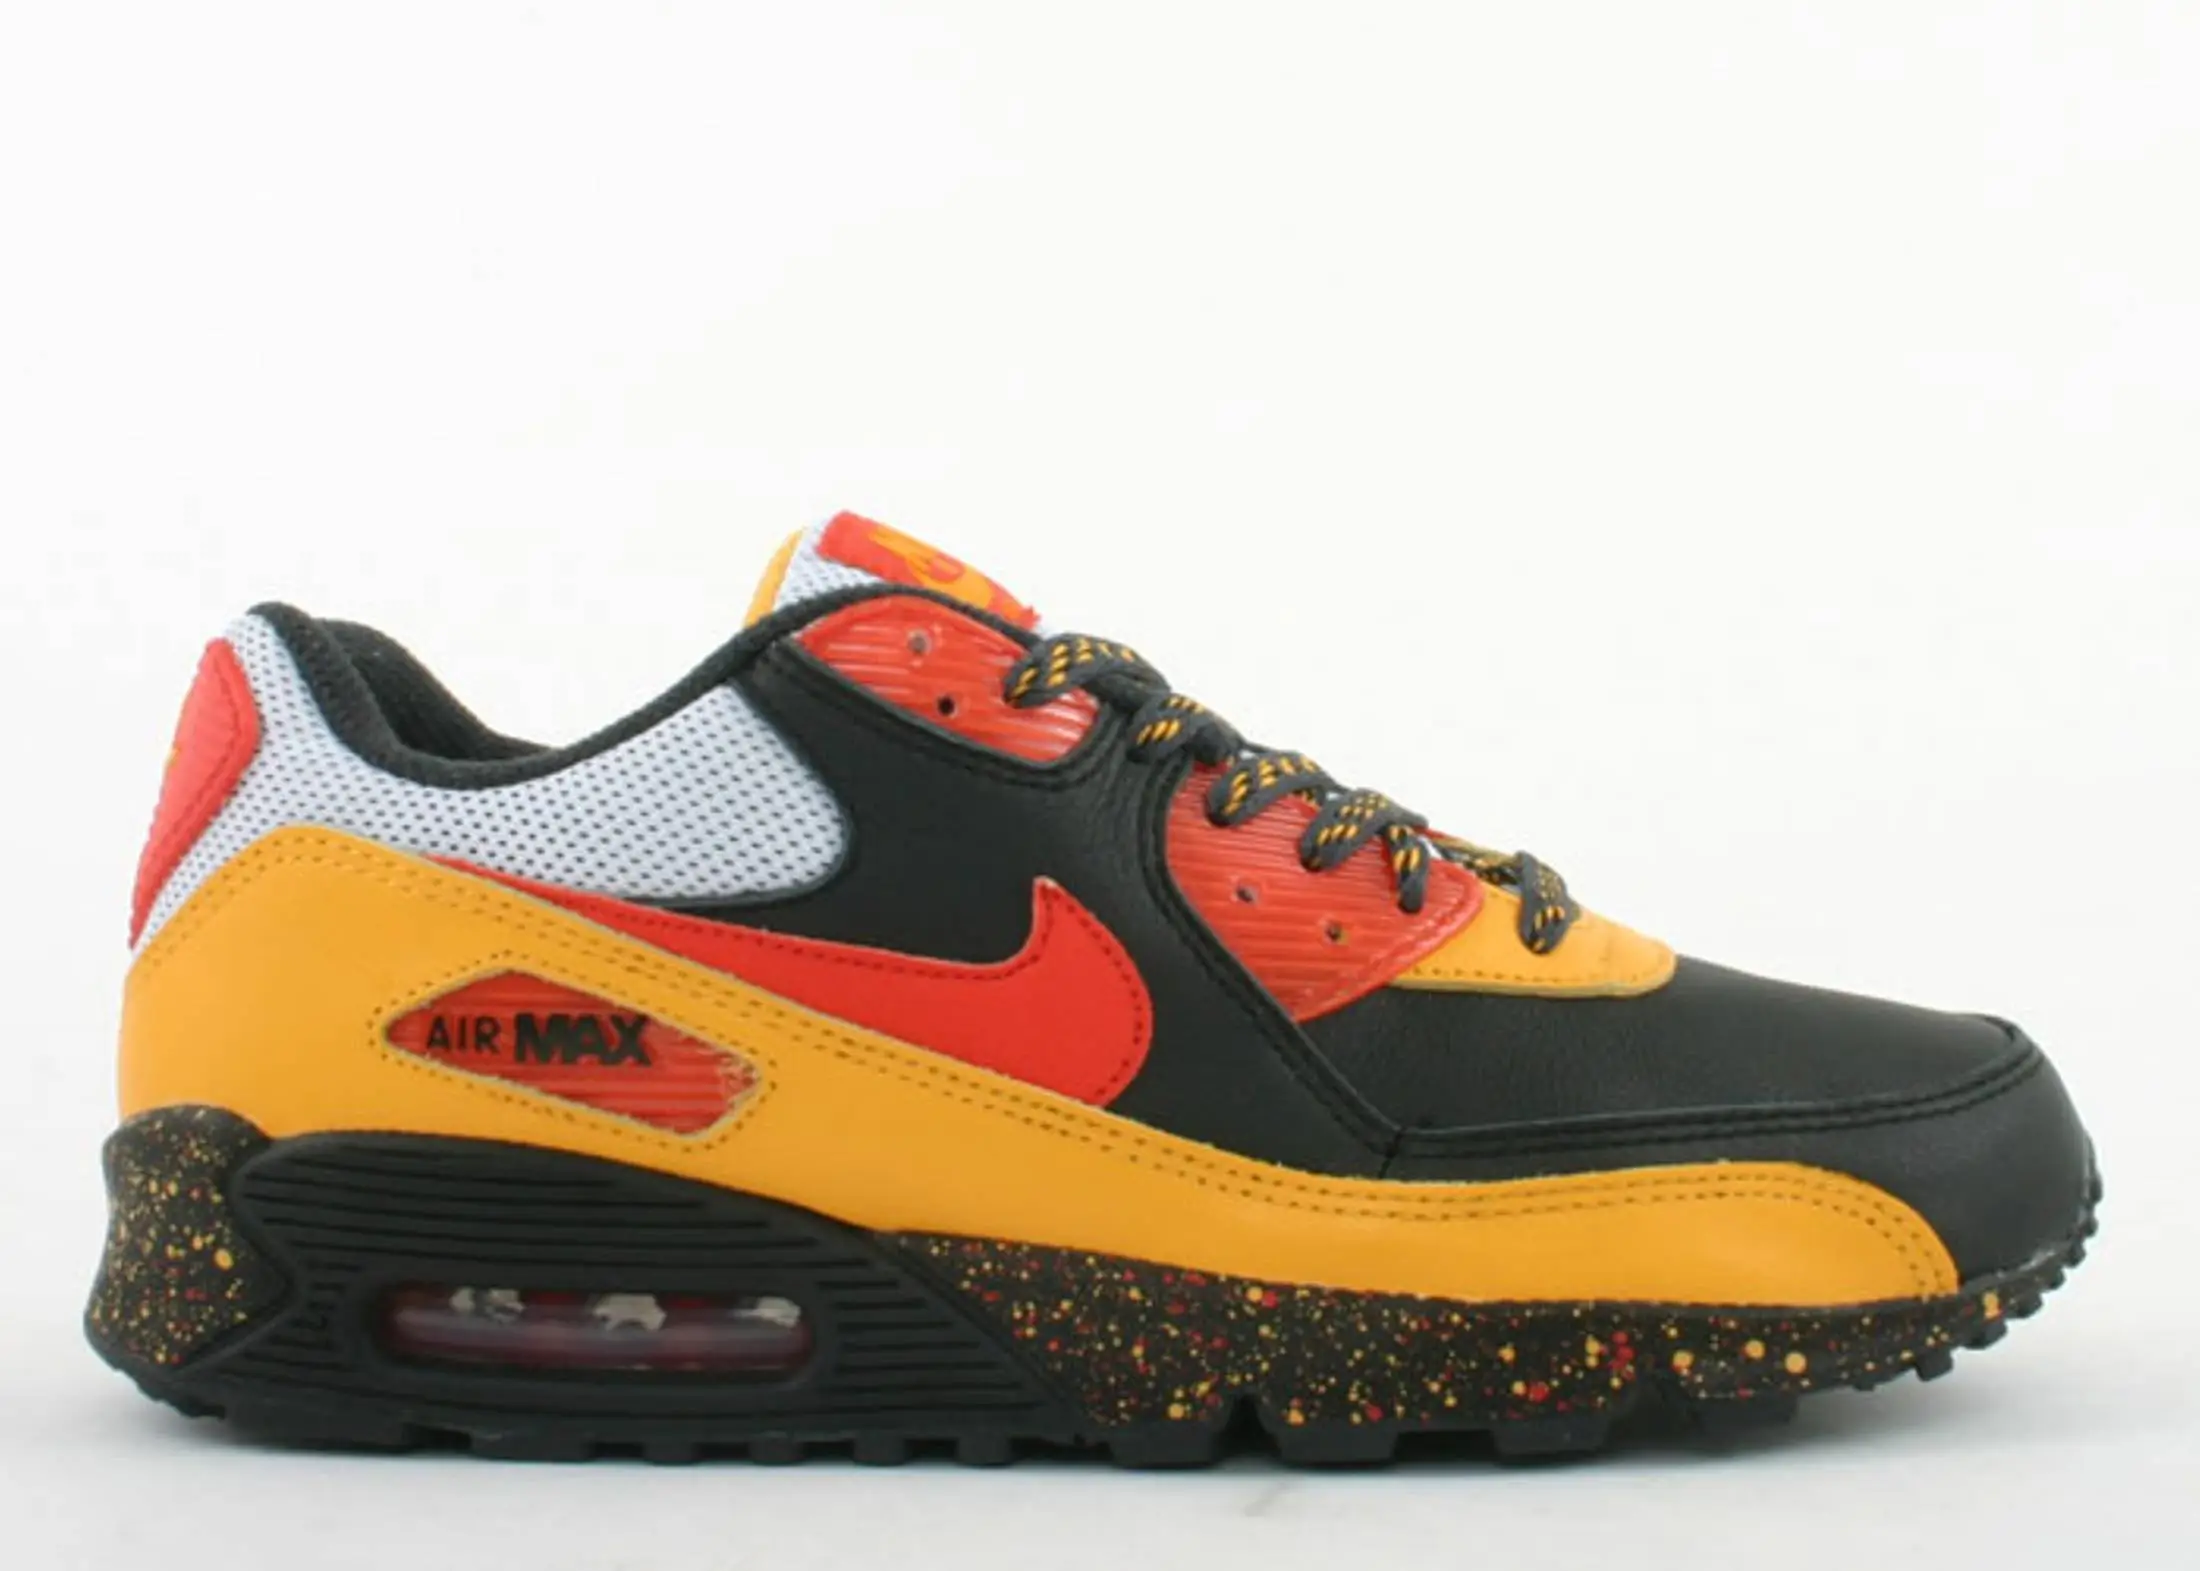 25 Best Nike Air Max 90s of All Time